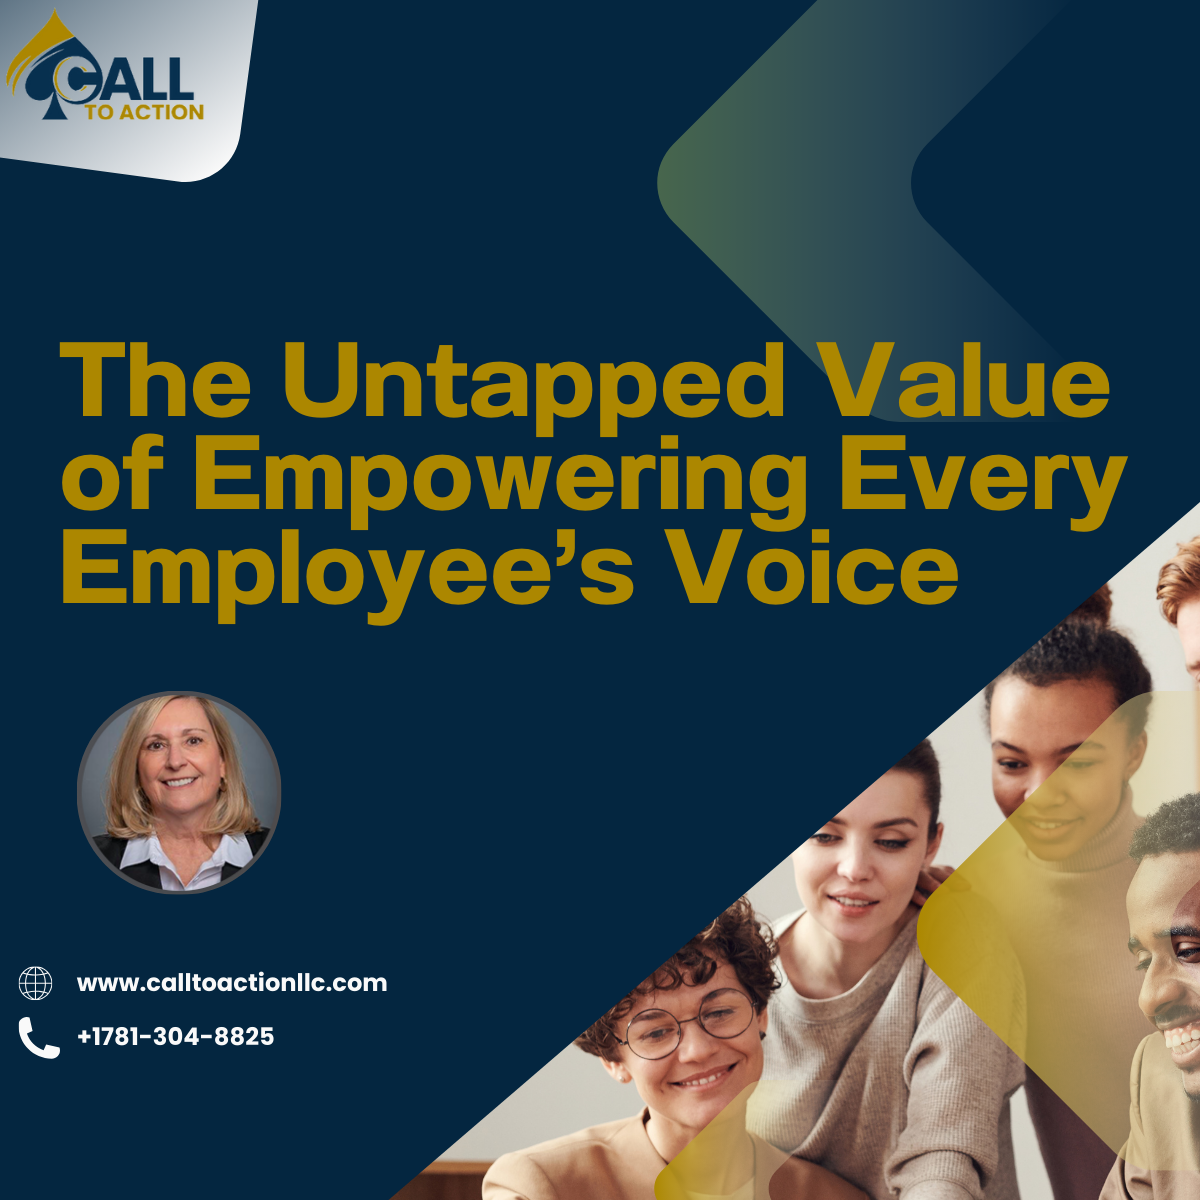 The Untapped Value of Empowering Every Employee’s Voice